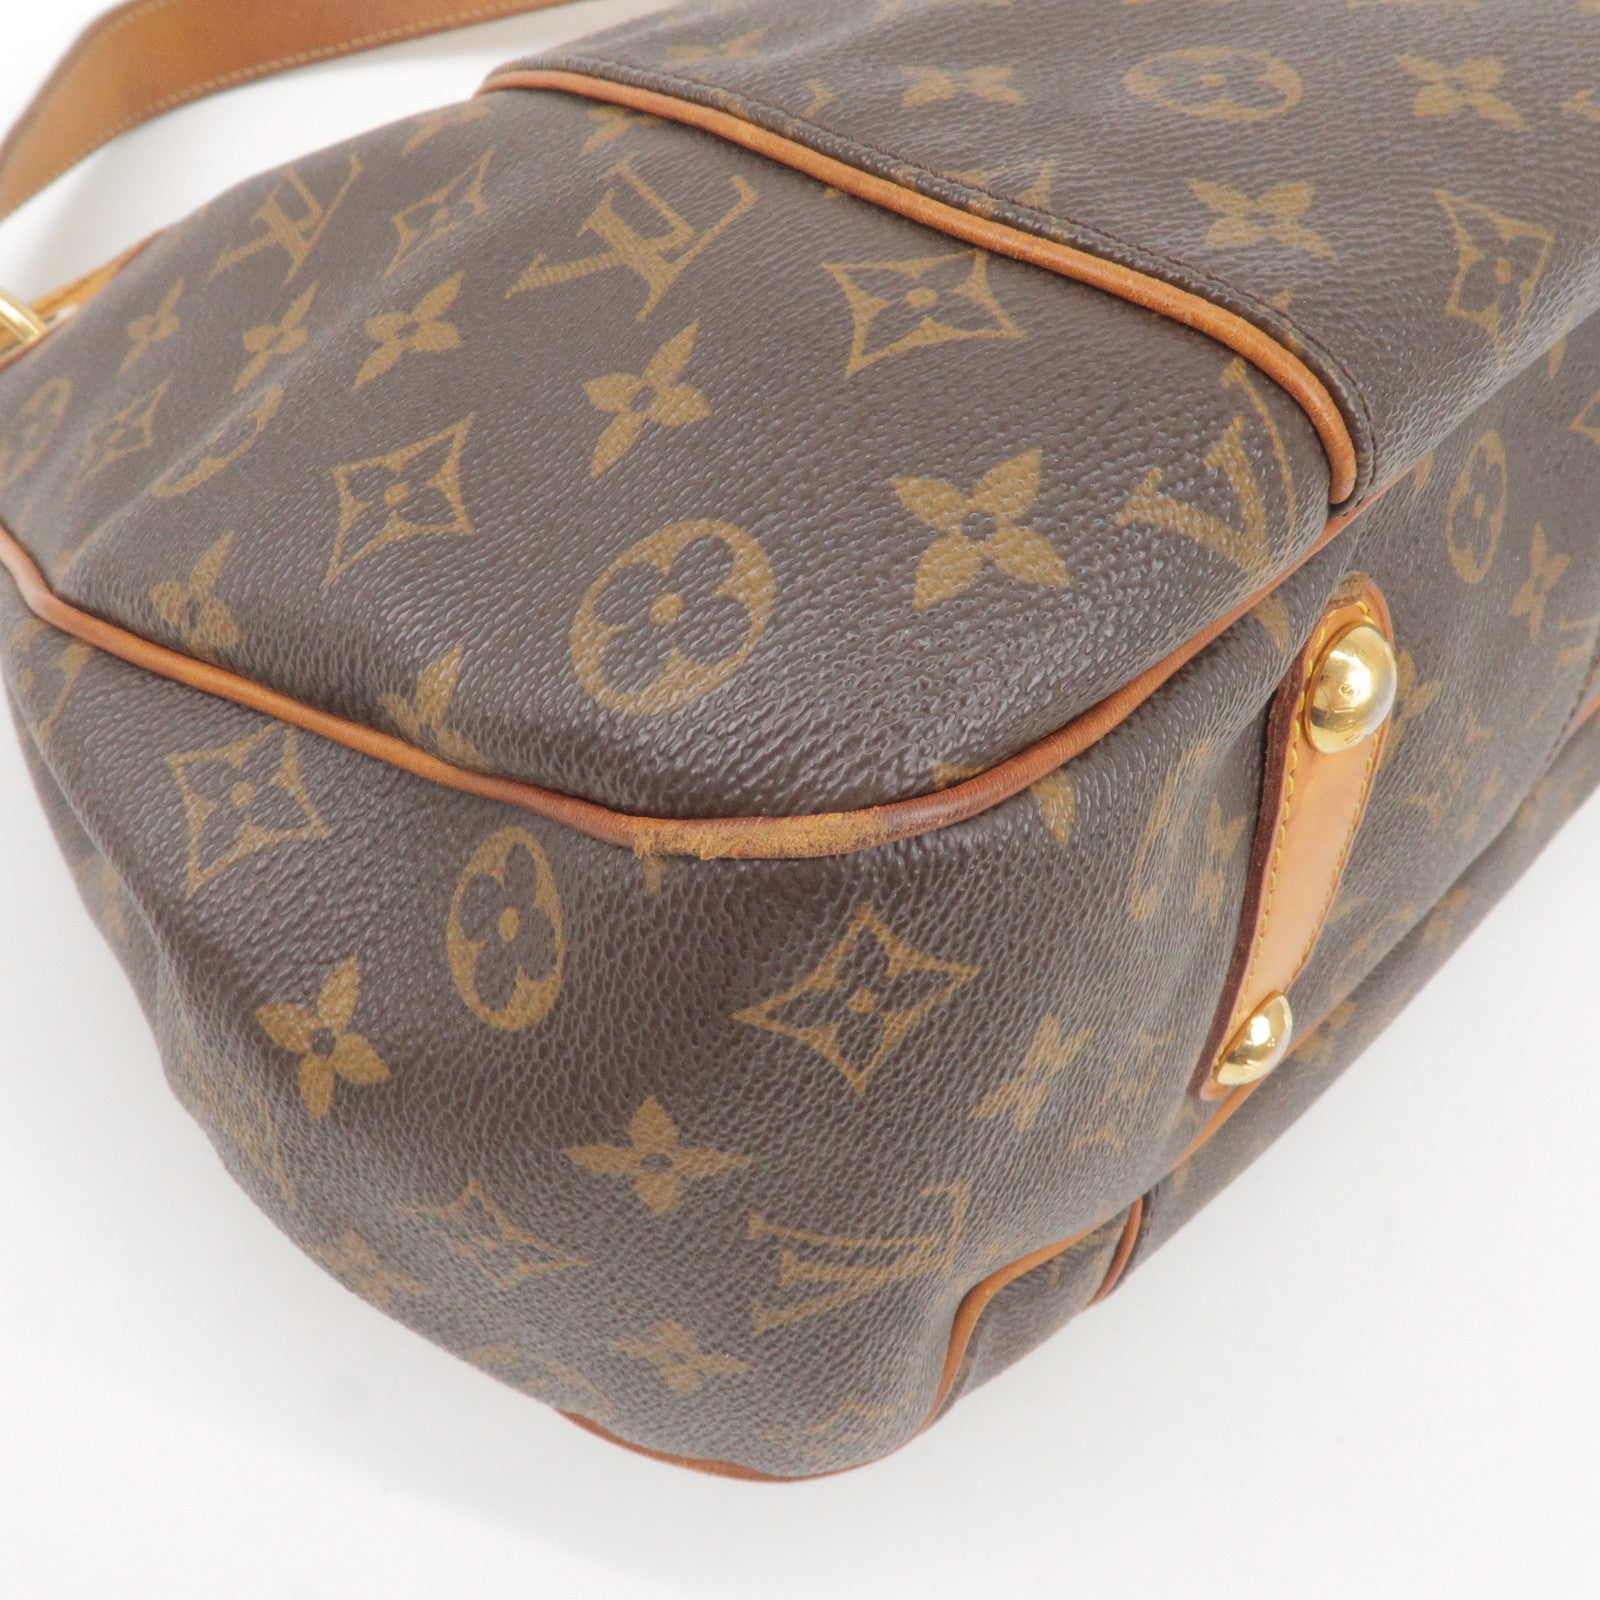 What are our favorite Louis Vuitton bags?